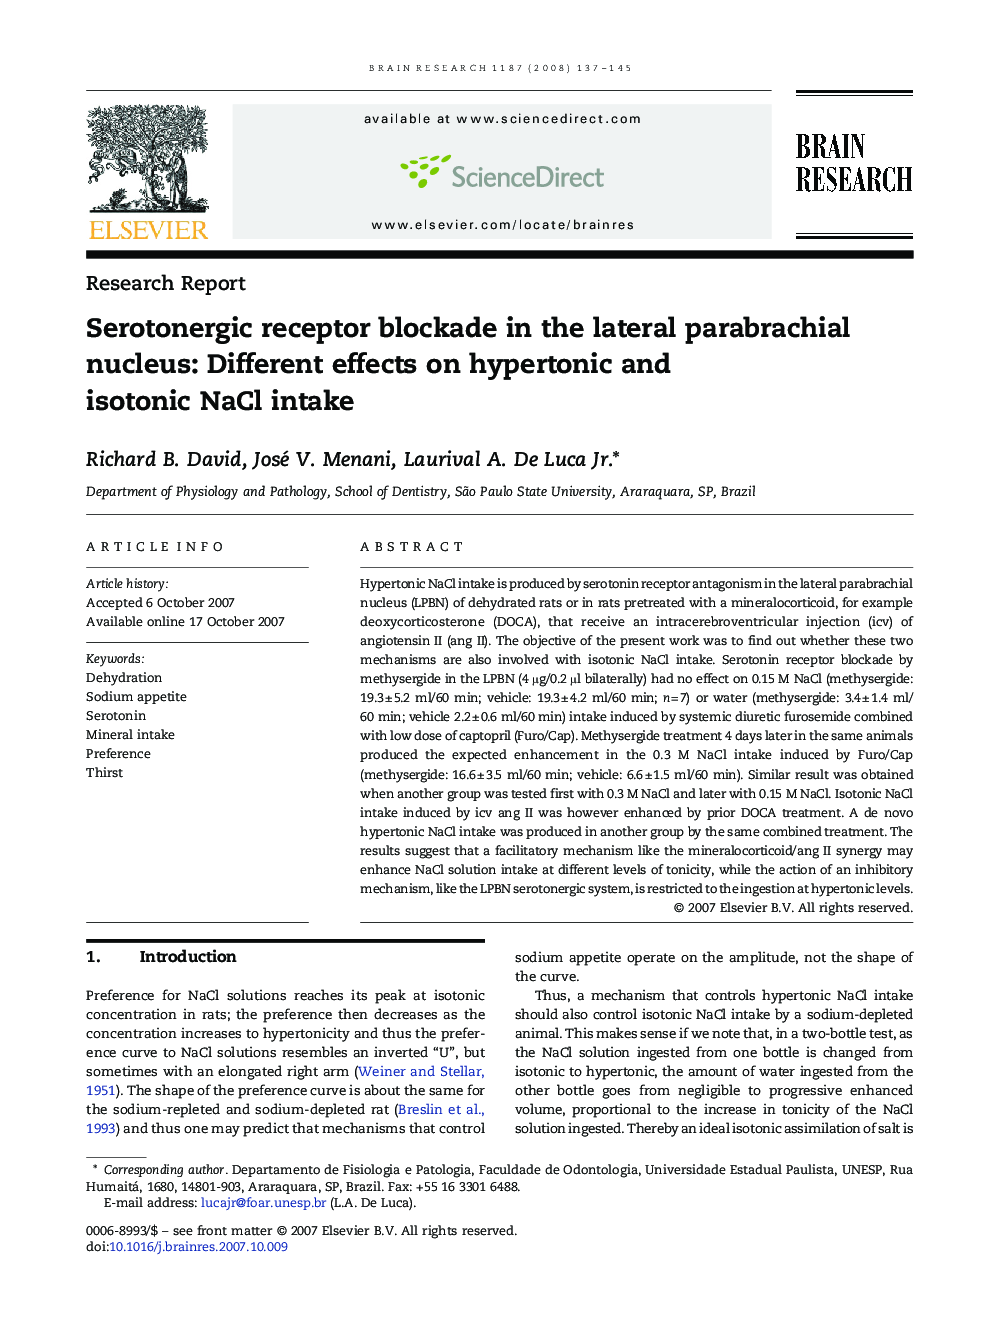 Serotonergic receptor blockade in the lateral parabrachial nucleus: Different effects on hypertonic and isotonic NaCl intake